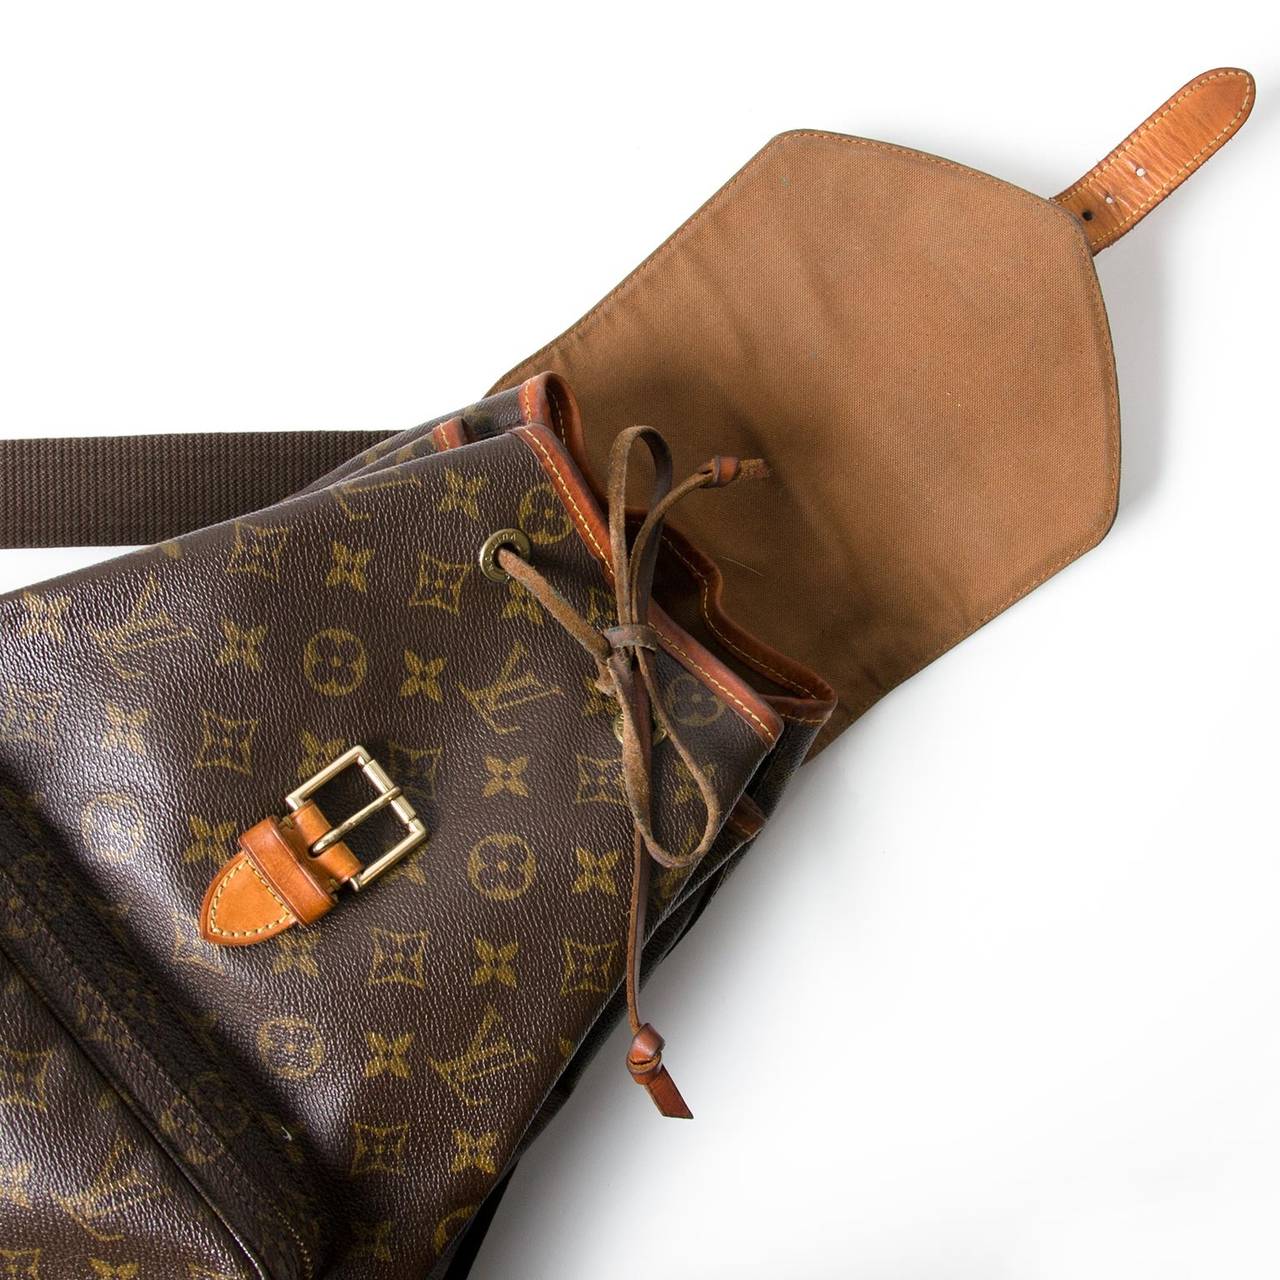 Made by the iconic French brand, the vintage Louis Vuitton bag is a throw over the shoulder style backpack; both practical and chic. Crafted from high quality leather, the brown and camel coloured, monogrammed canvas is filled with signature 'LV'